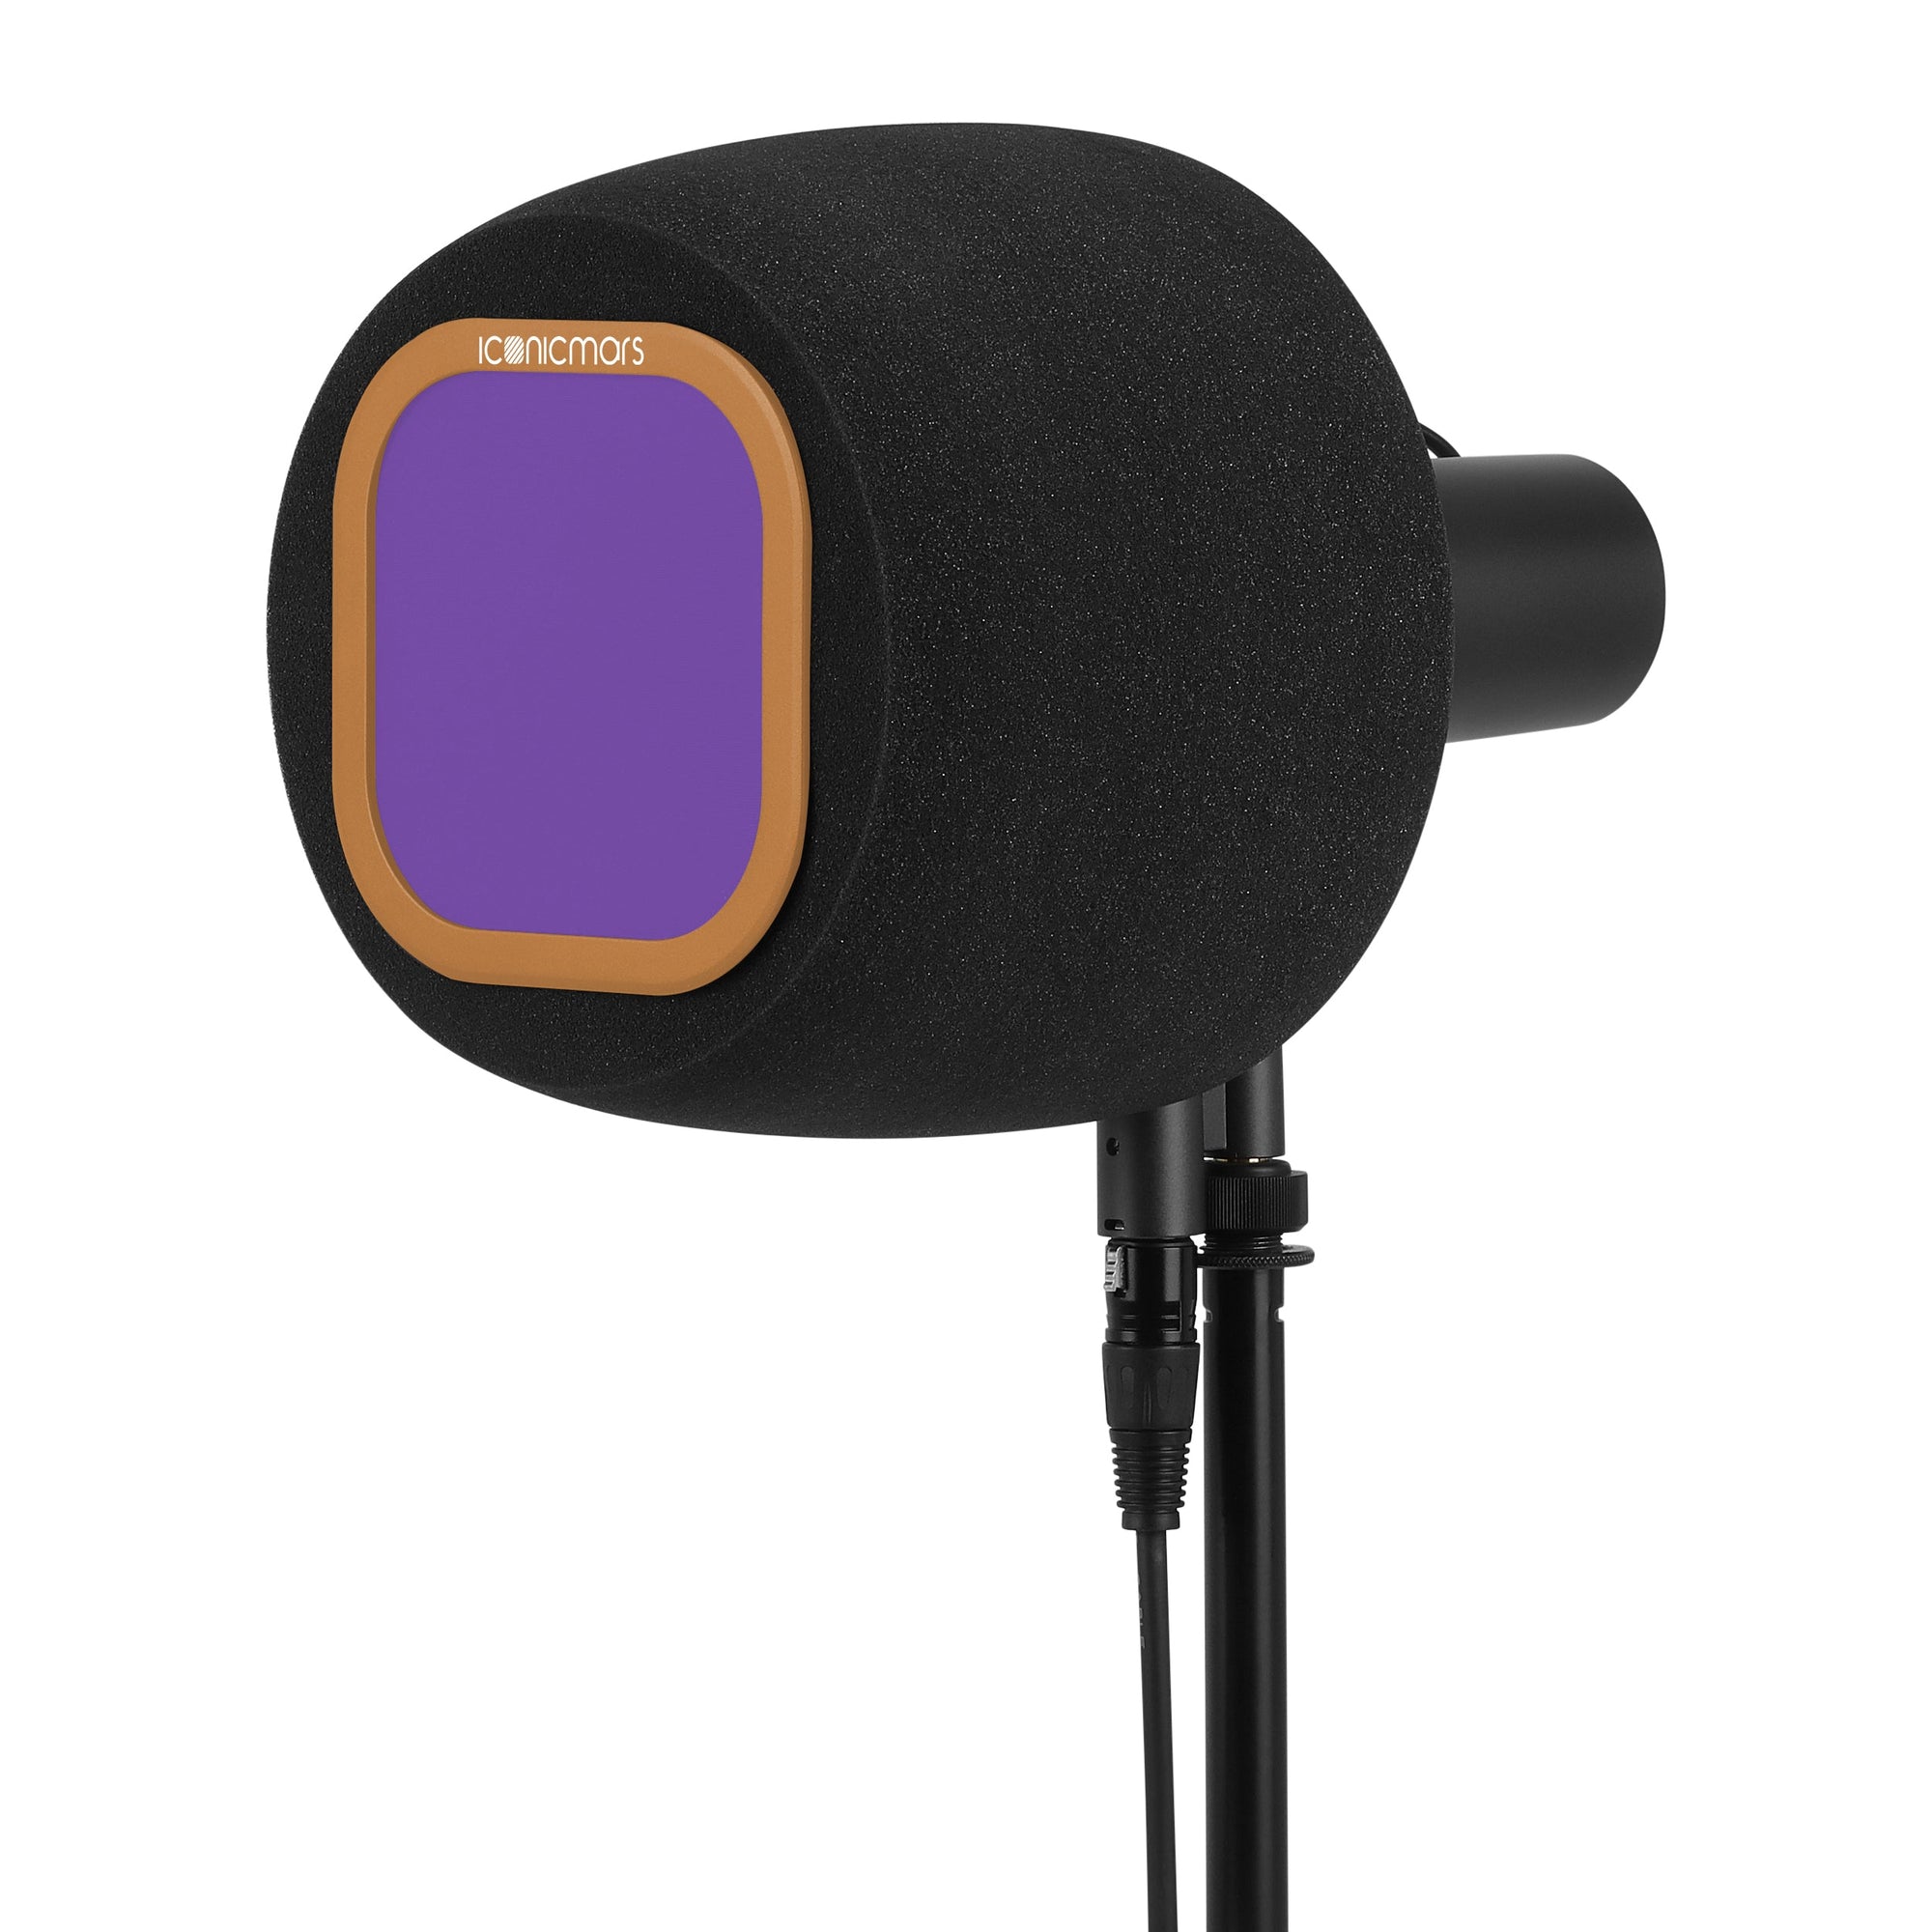 Comet X7B side with pop filter stand with eyeball like design for front facing microphone like Shure SM7B  -- PB&J